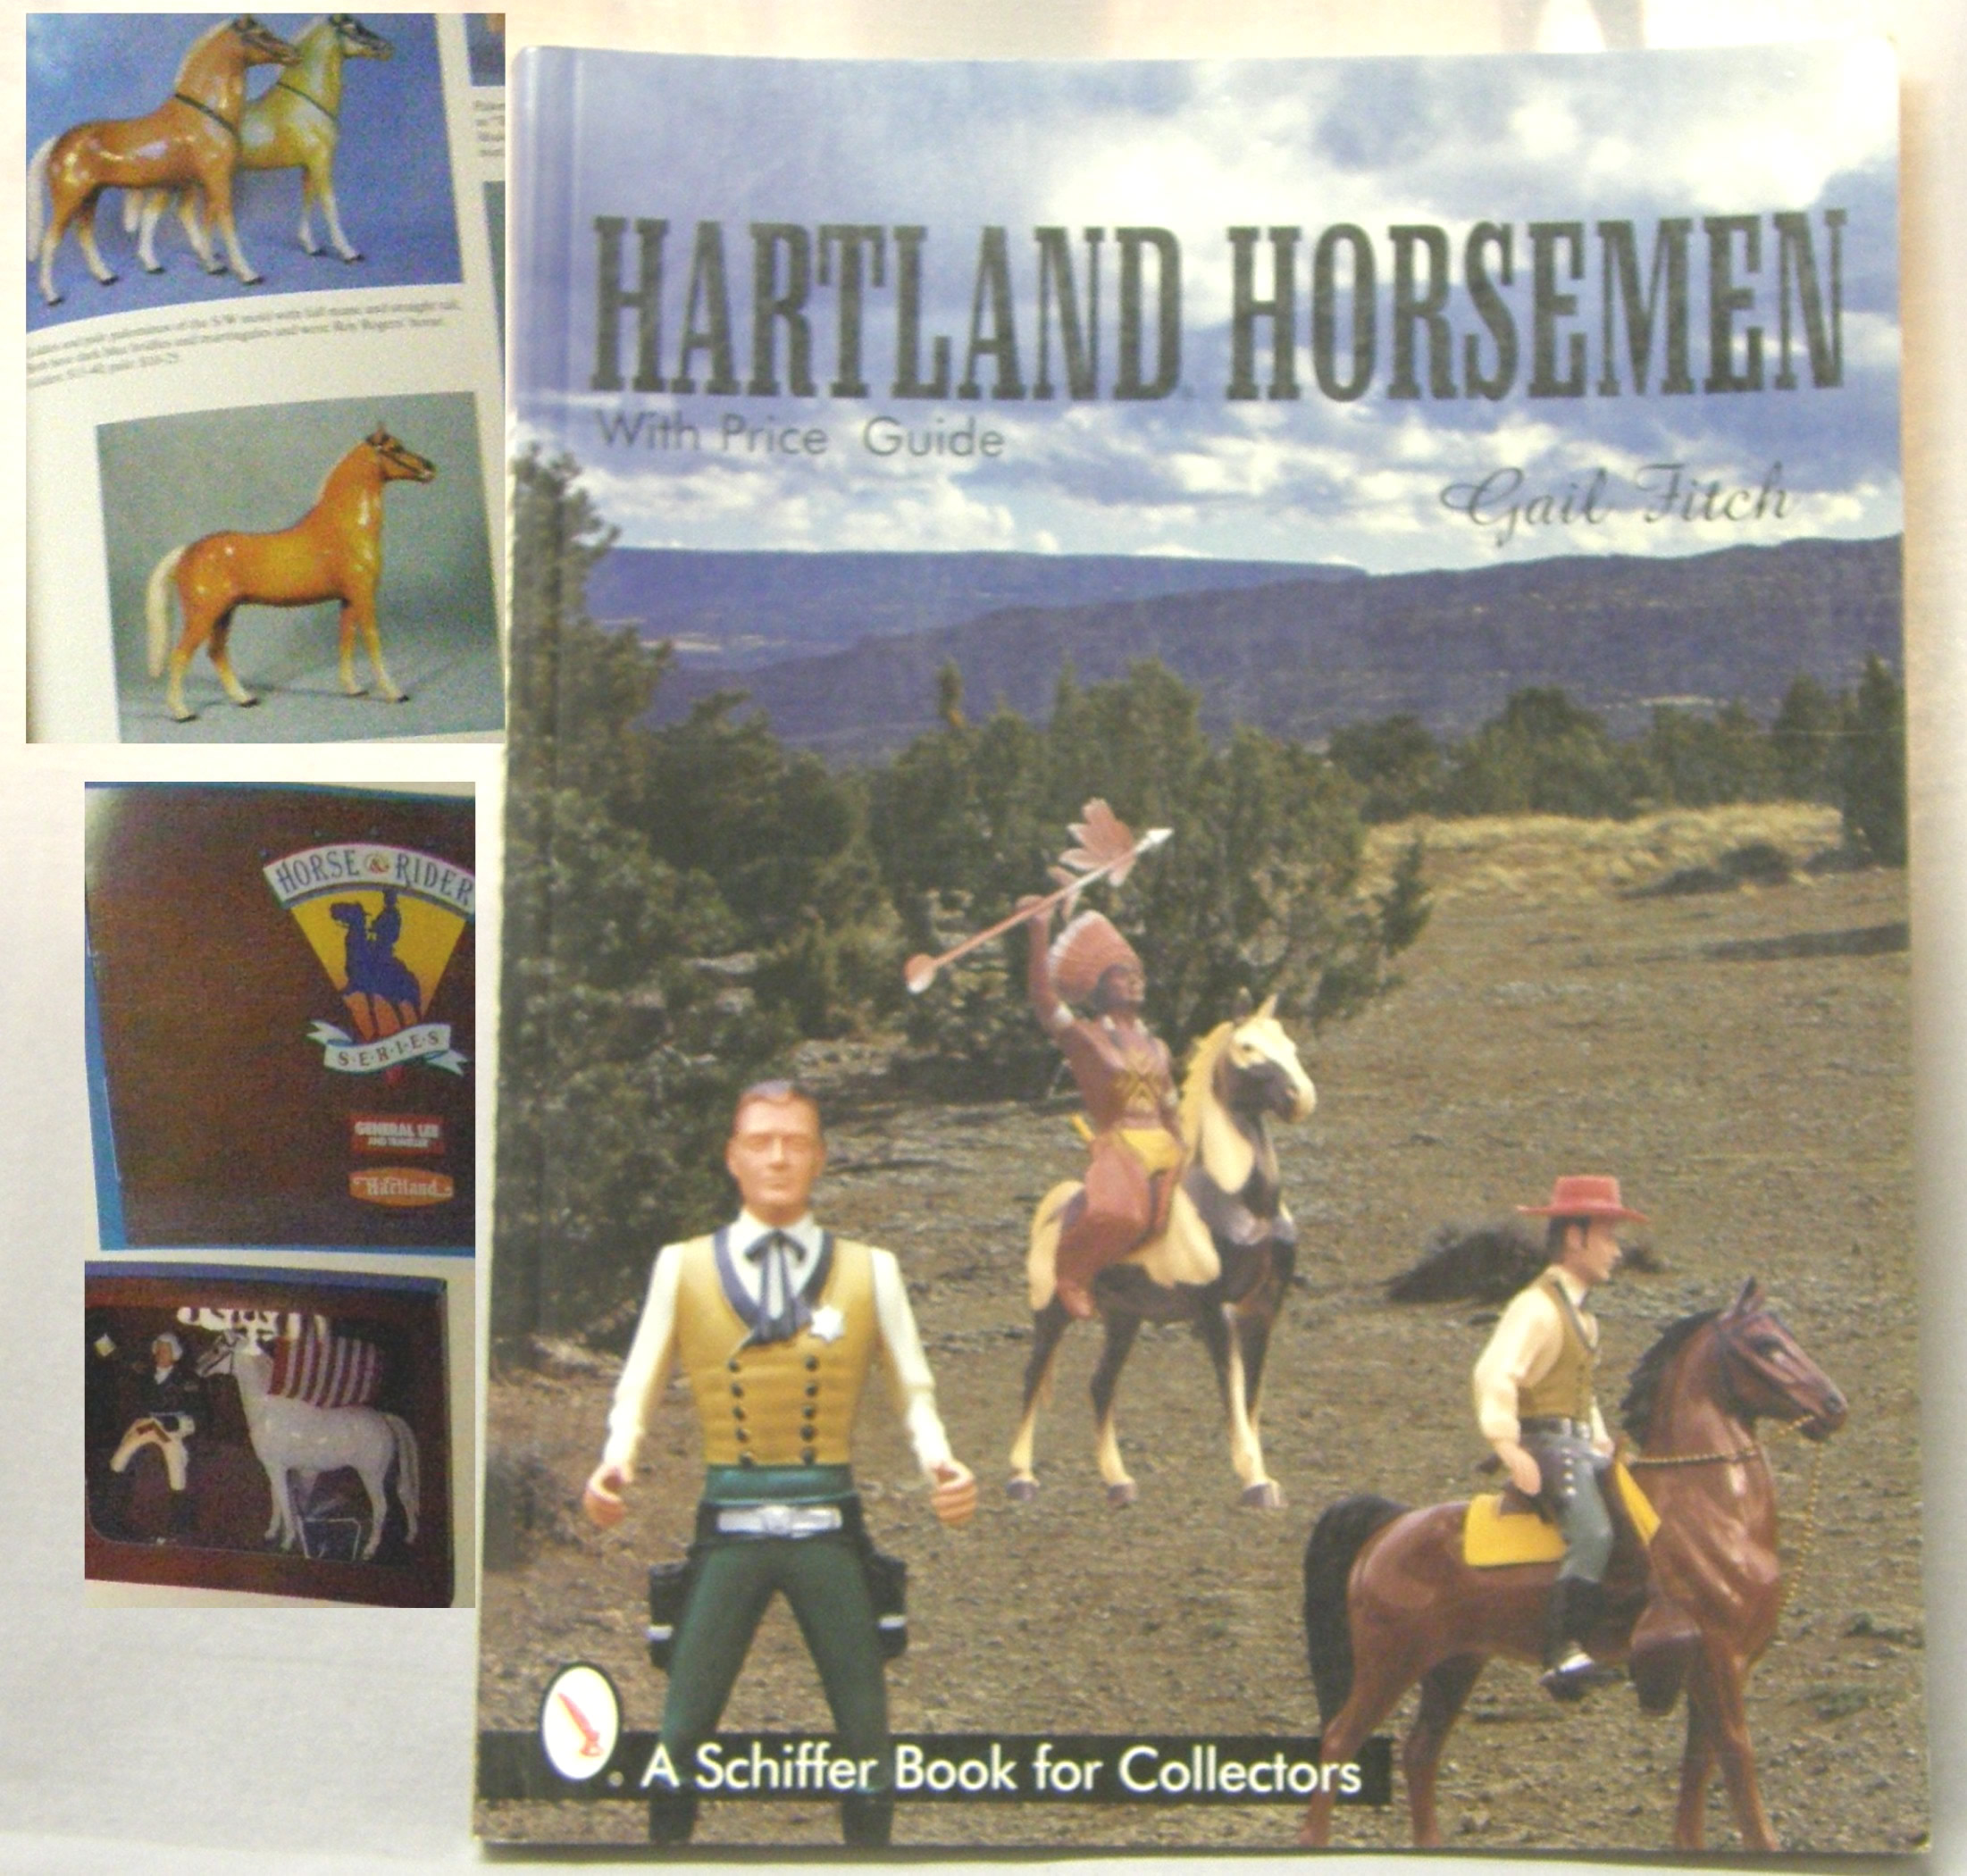 Hartland Horsemen Schiffer Book for Collectors with Price Guide By Gail Fitch